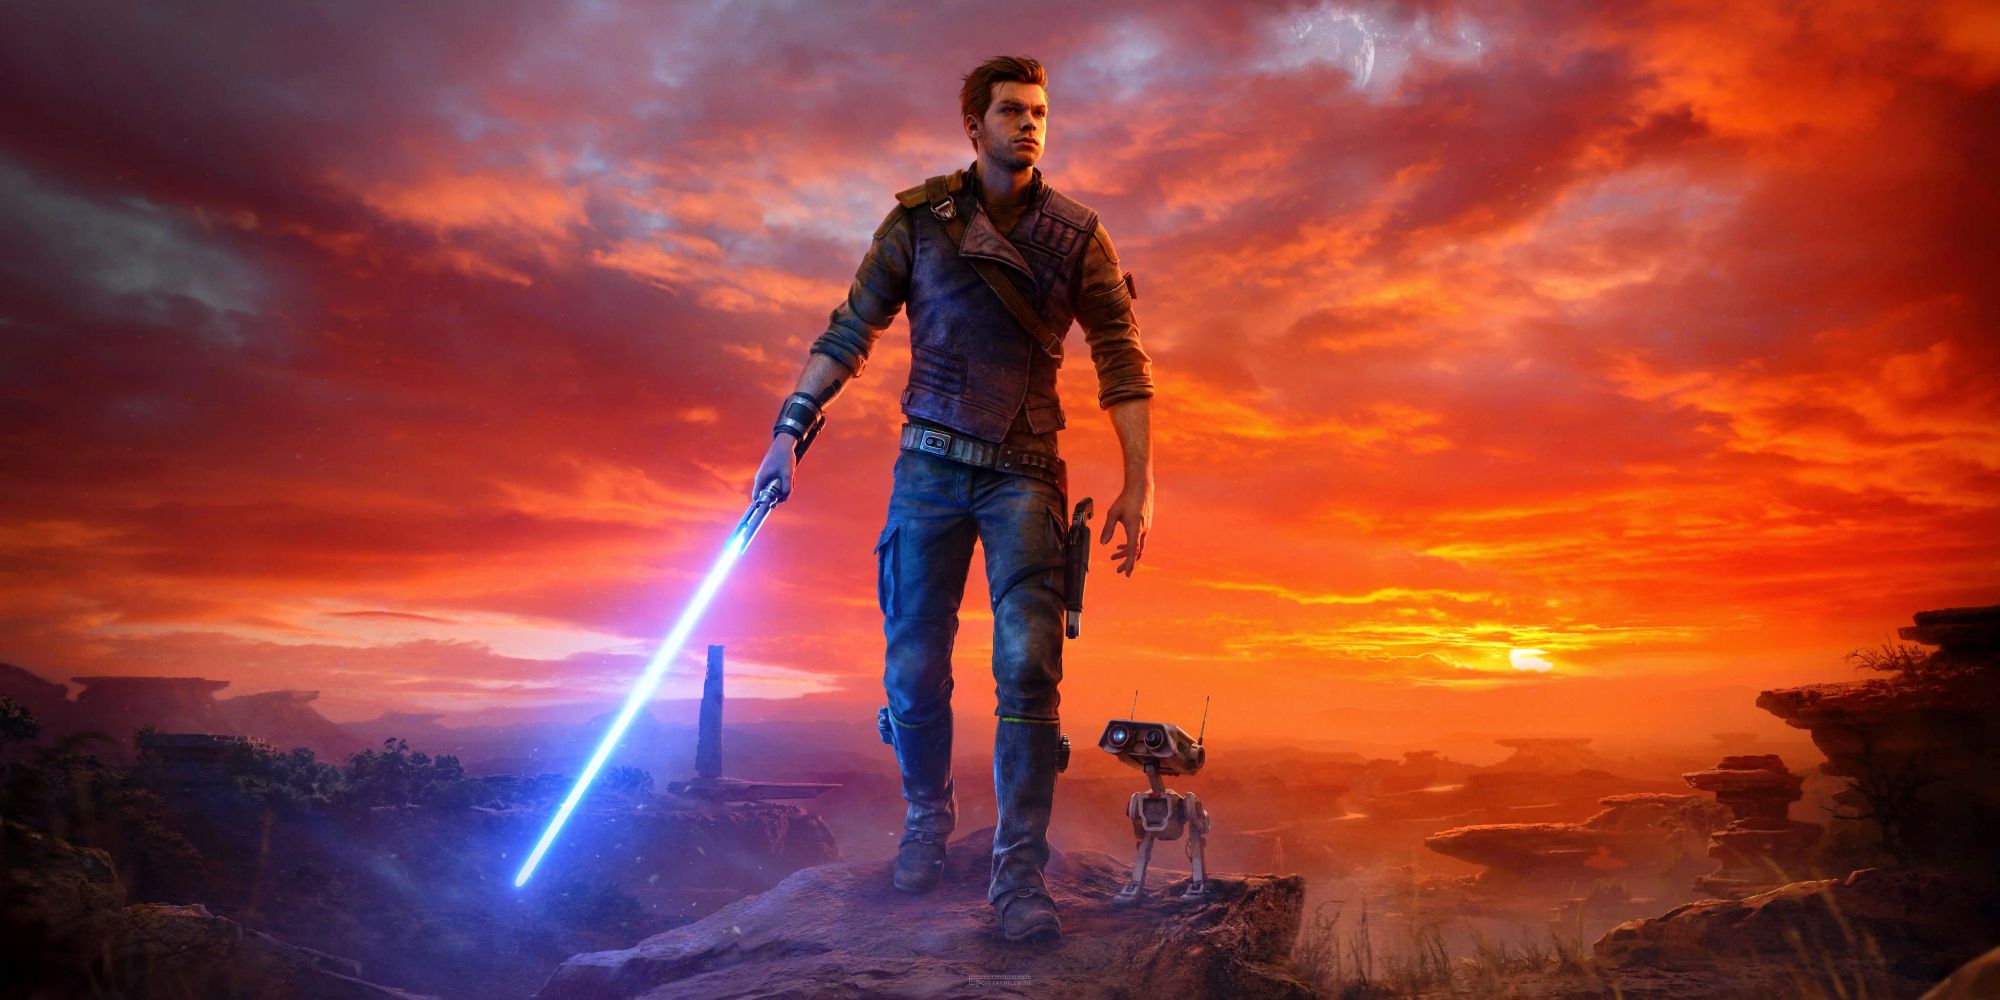 A man and a small droid standing on the top of a rocky hill. The man, Cal Kestis, is holding a blue lightsaber down by his side while the droid, BD-1, looks up toward him. Buildings can be seen in the distance in the arid landscape. The sky is filled with bright orange clouds during sunset.